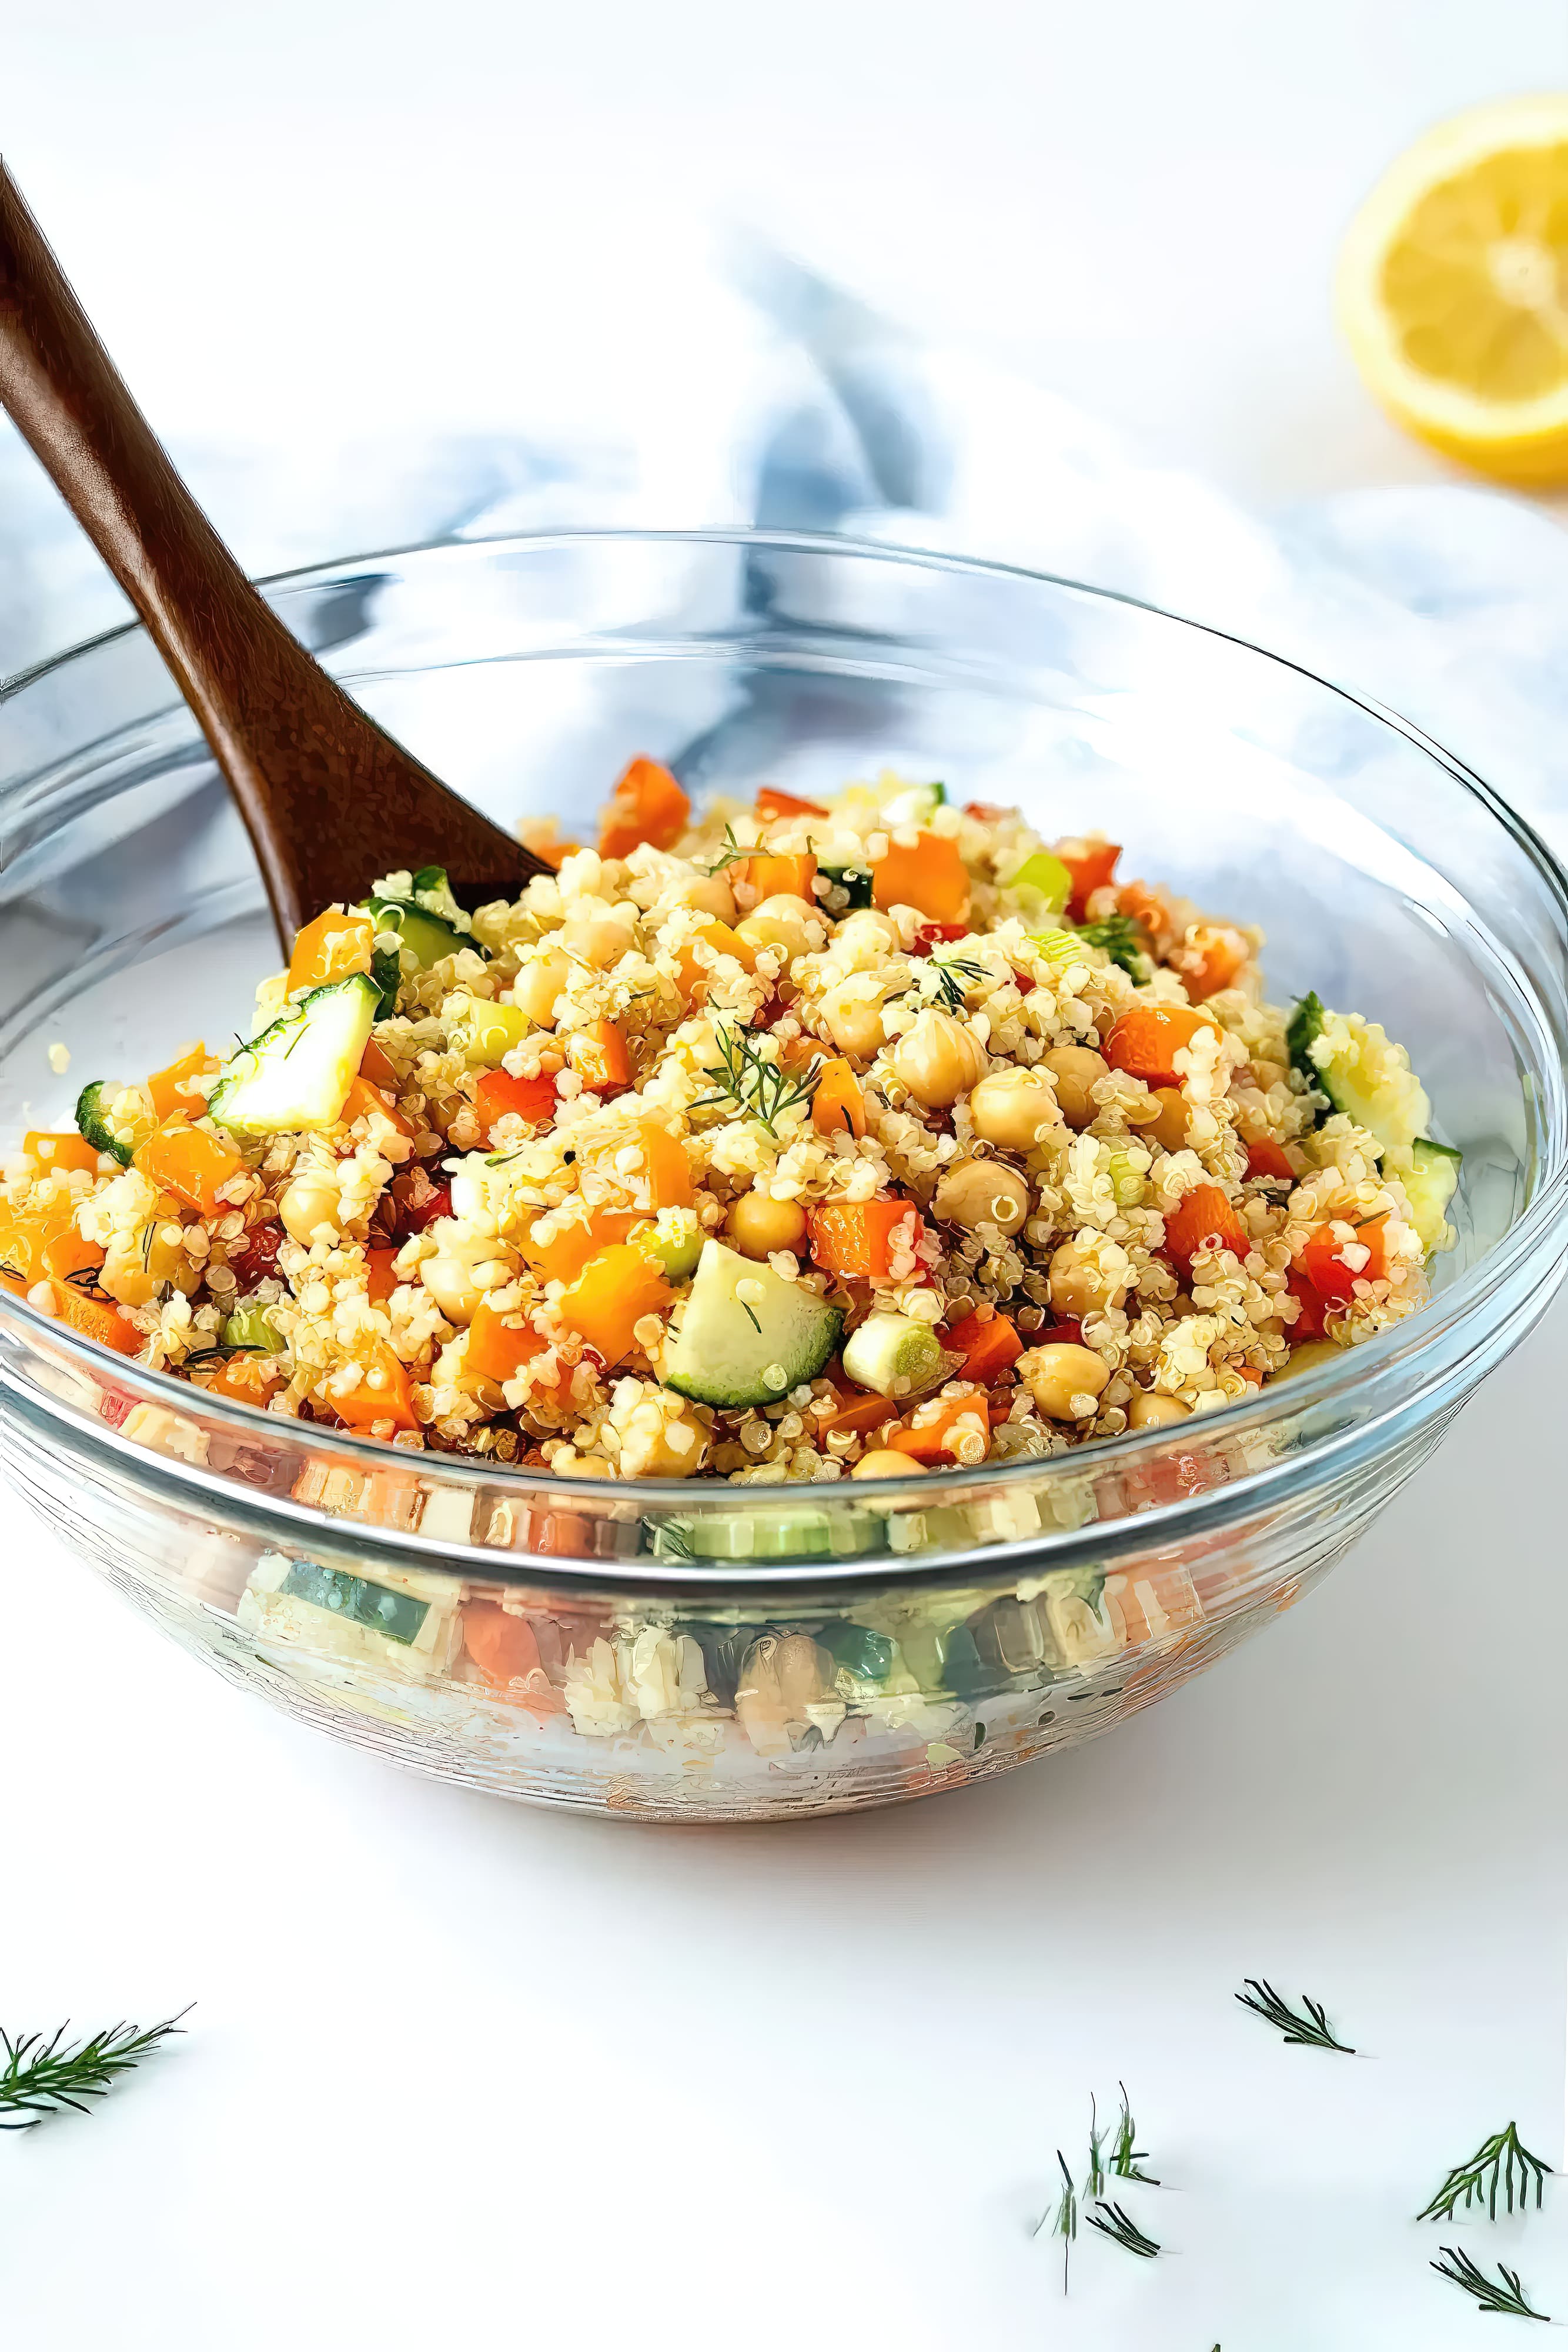 Image of quinoa chickpea salad with lemon dill dressing